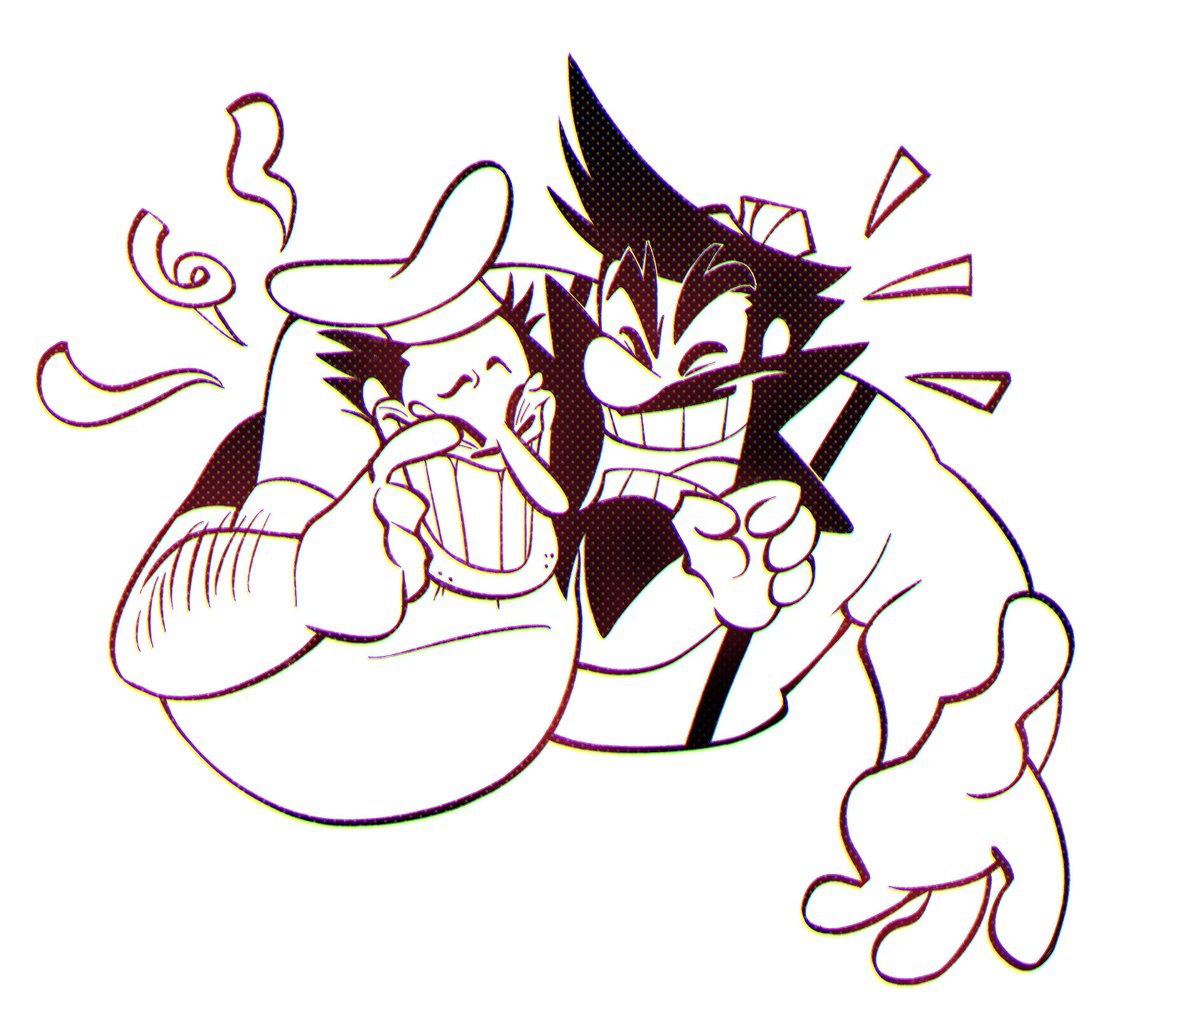 wee doodle cause I felt like I haven't drawn them having a good time in a while #peppiblast